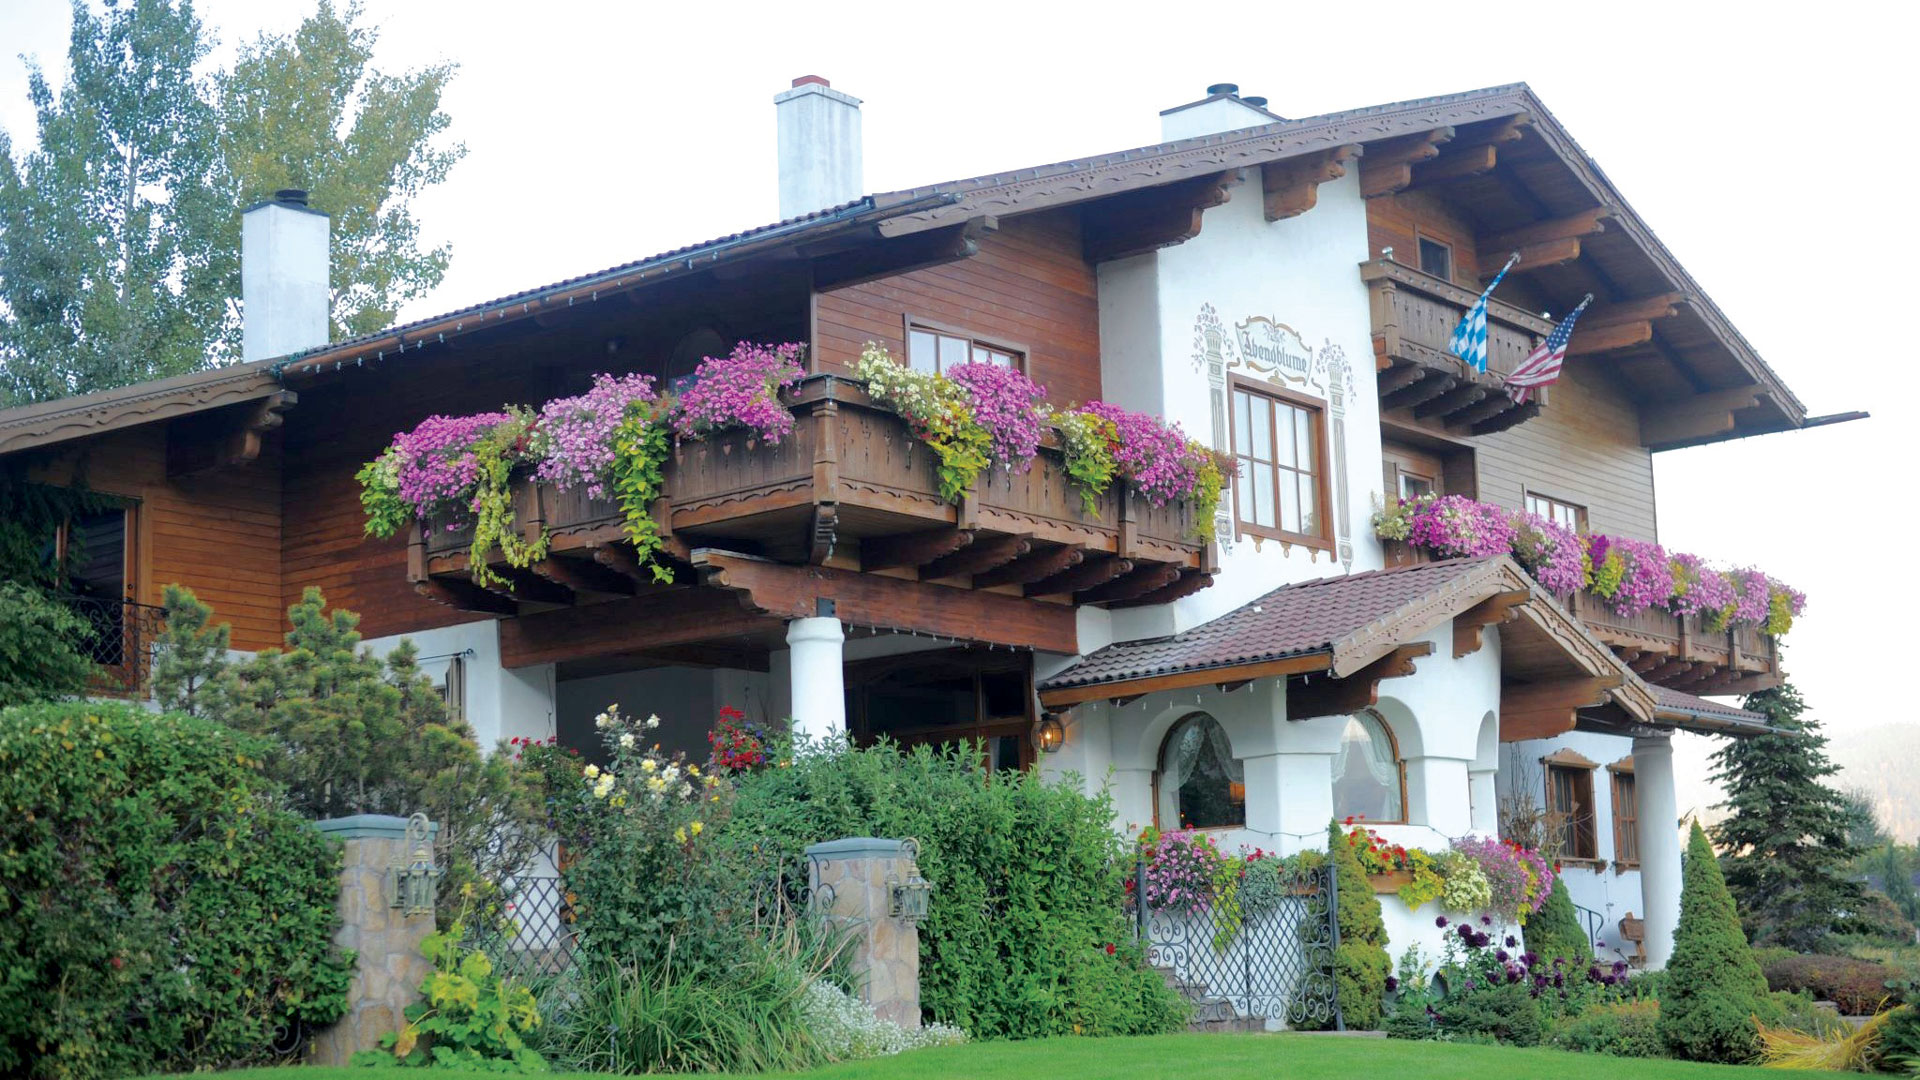 The Abdenblume Inn is the best place to stay to feel like you're in Europe.